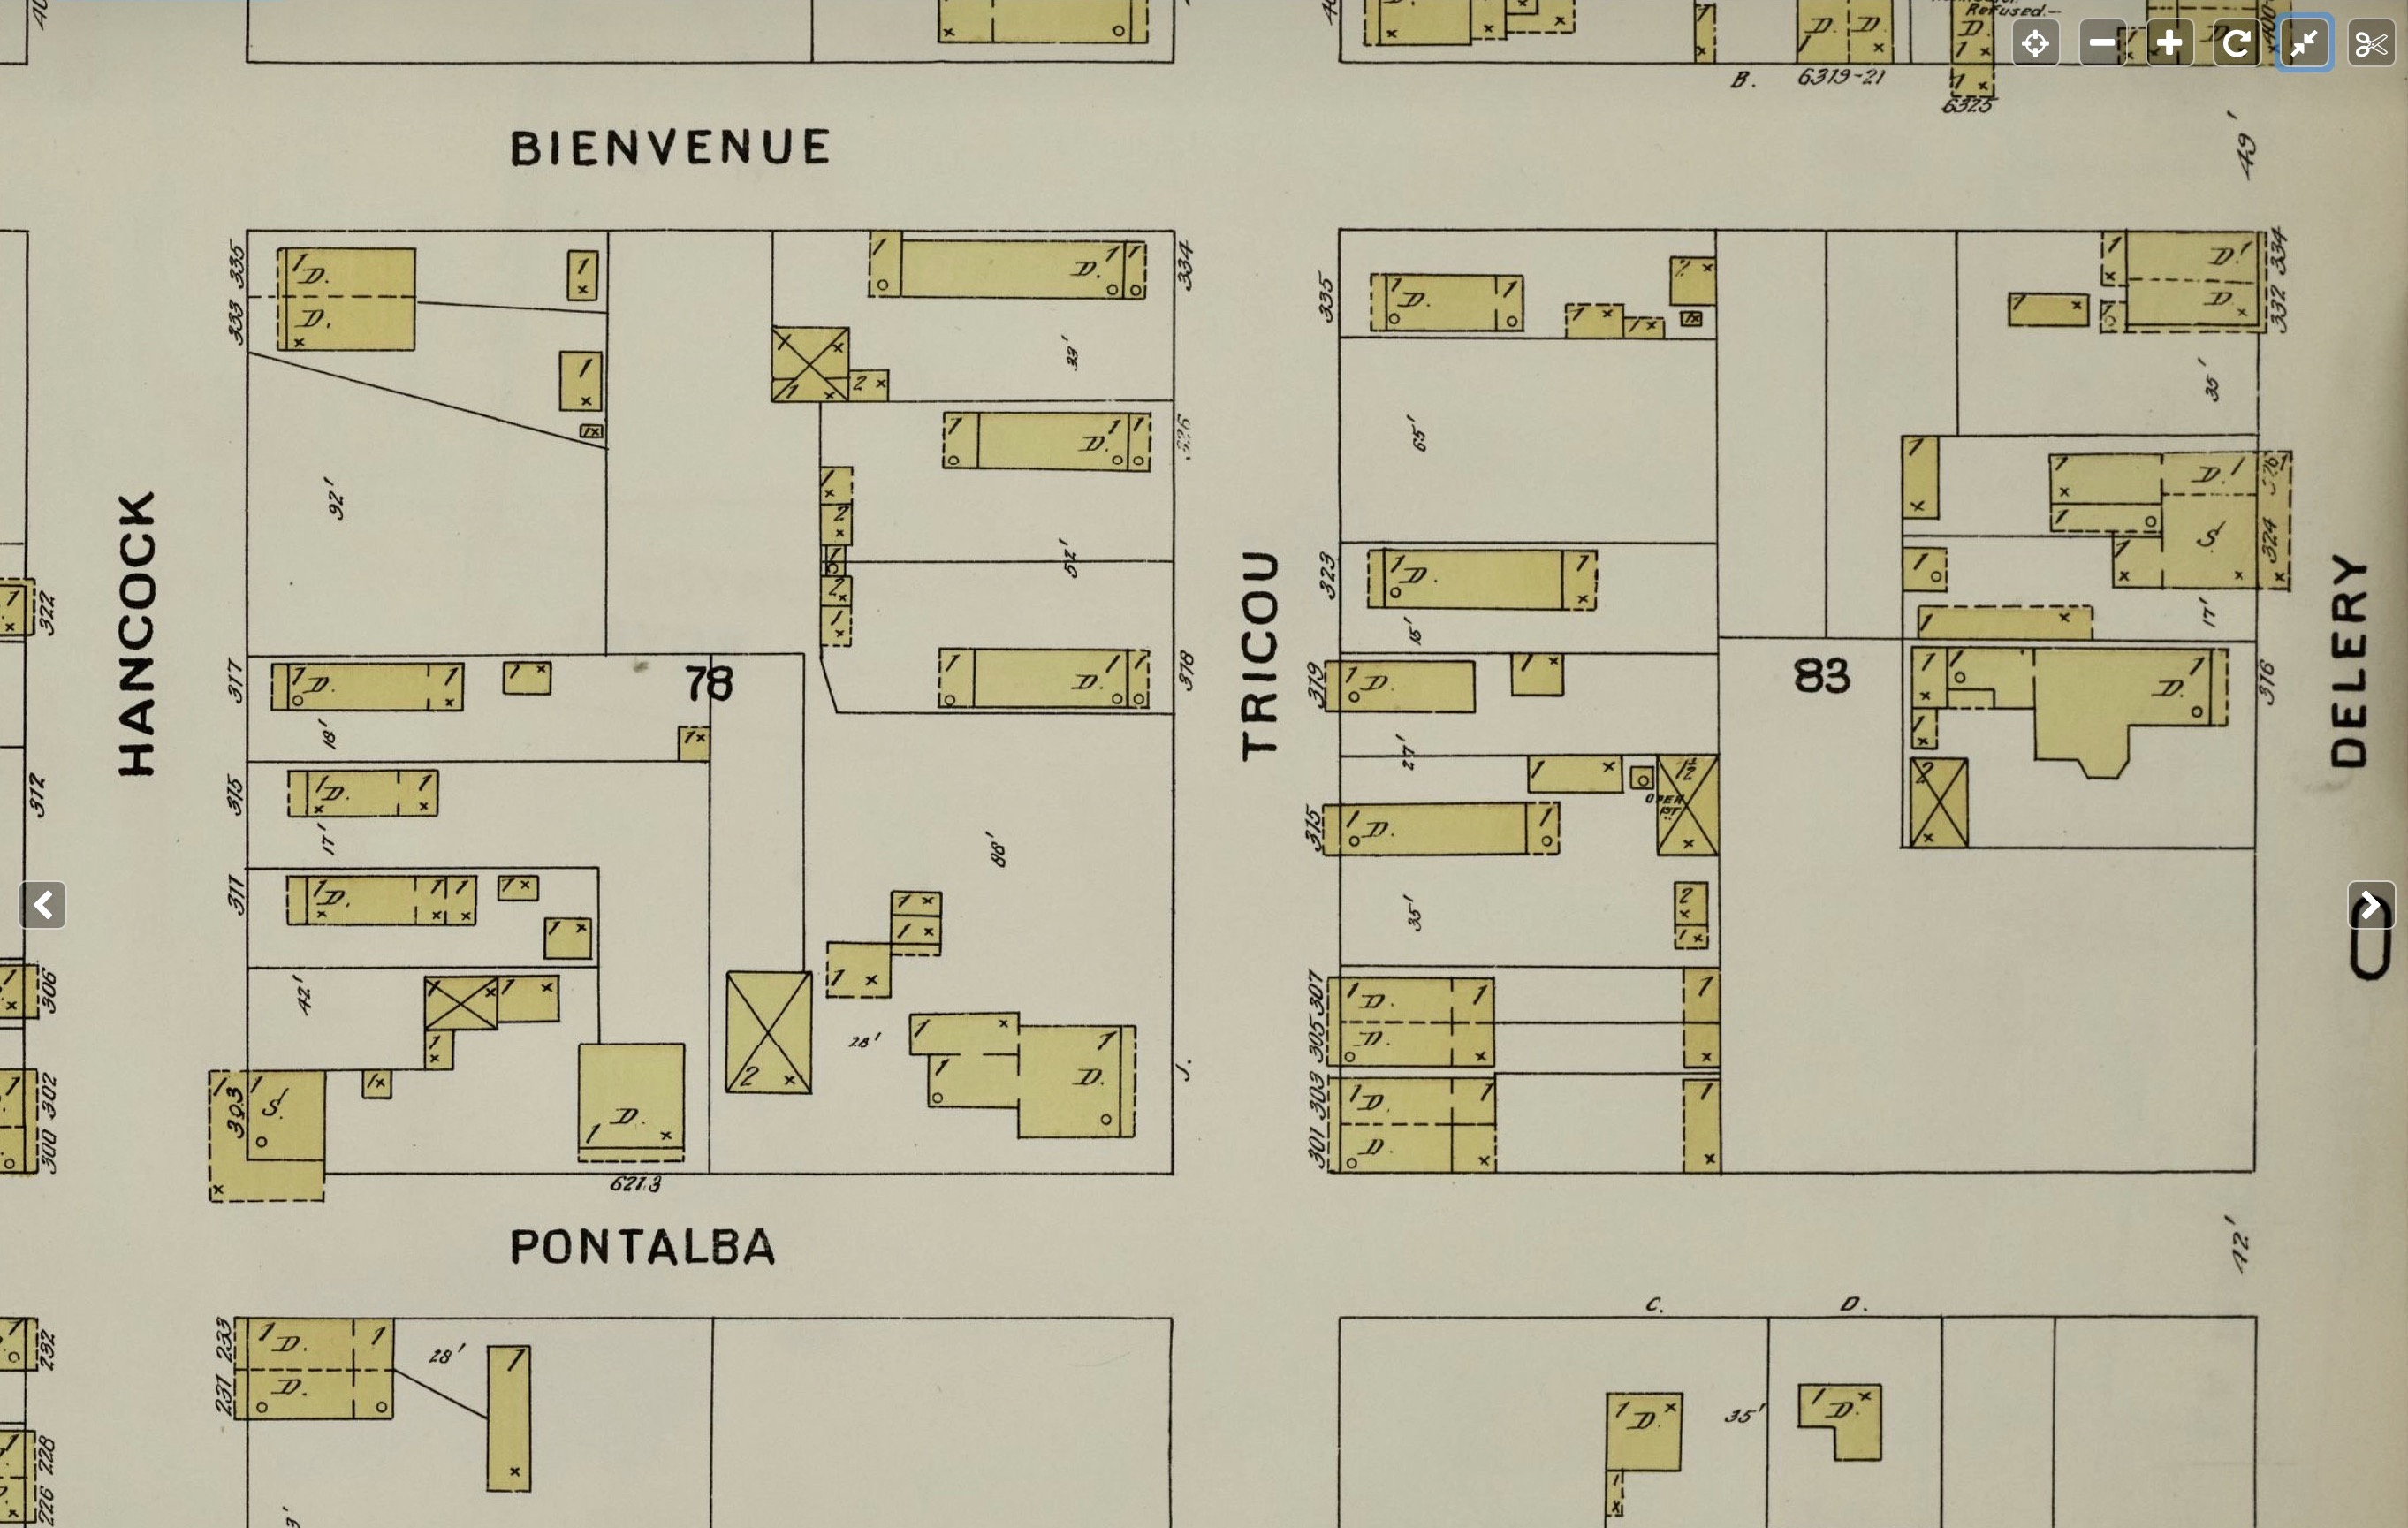 Map of Tricou Street and surroundings from 1893.